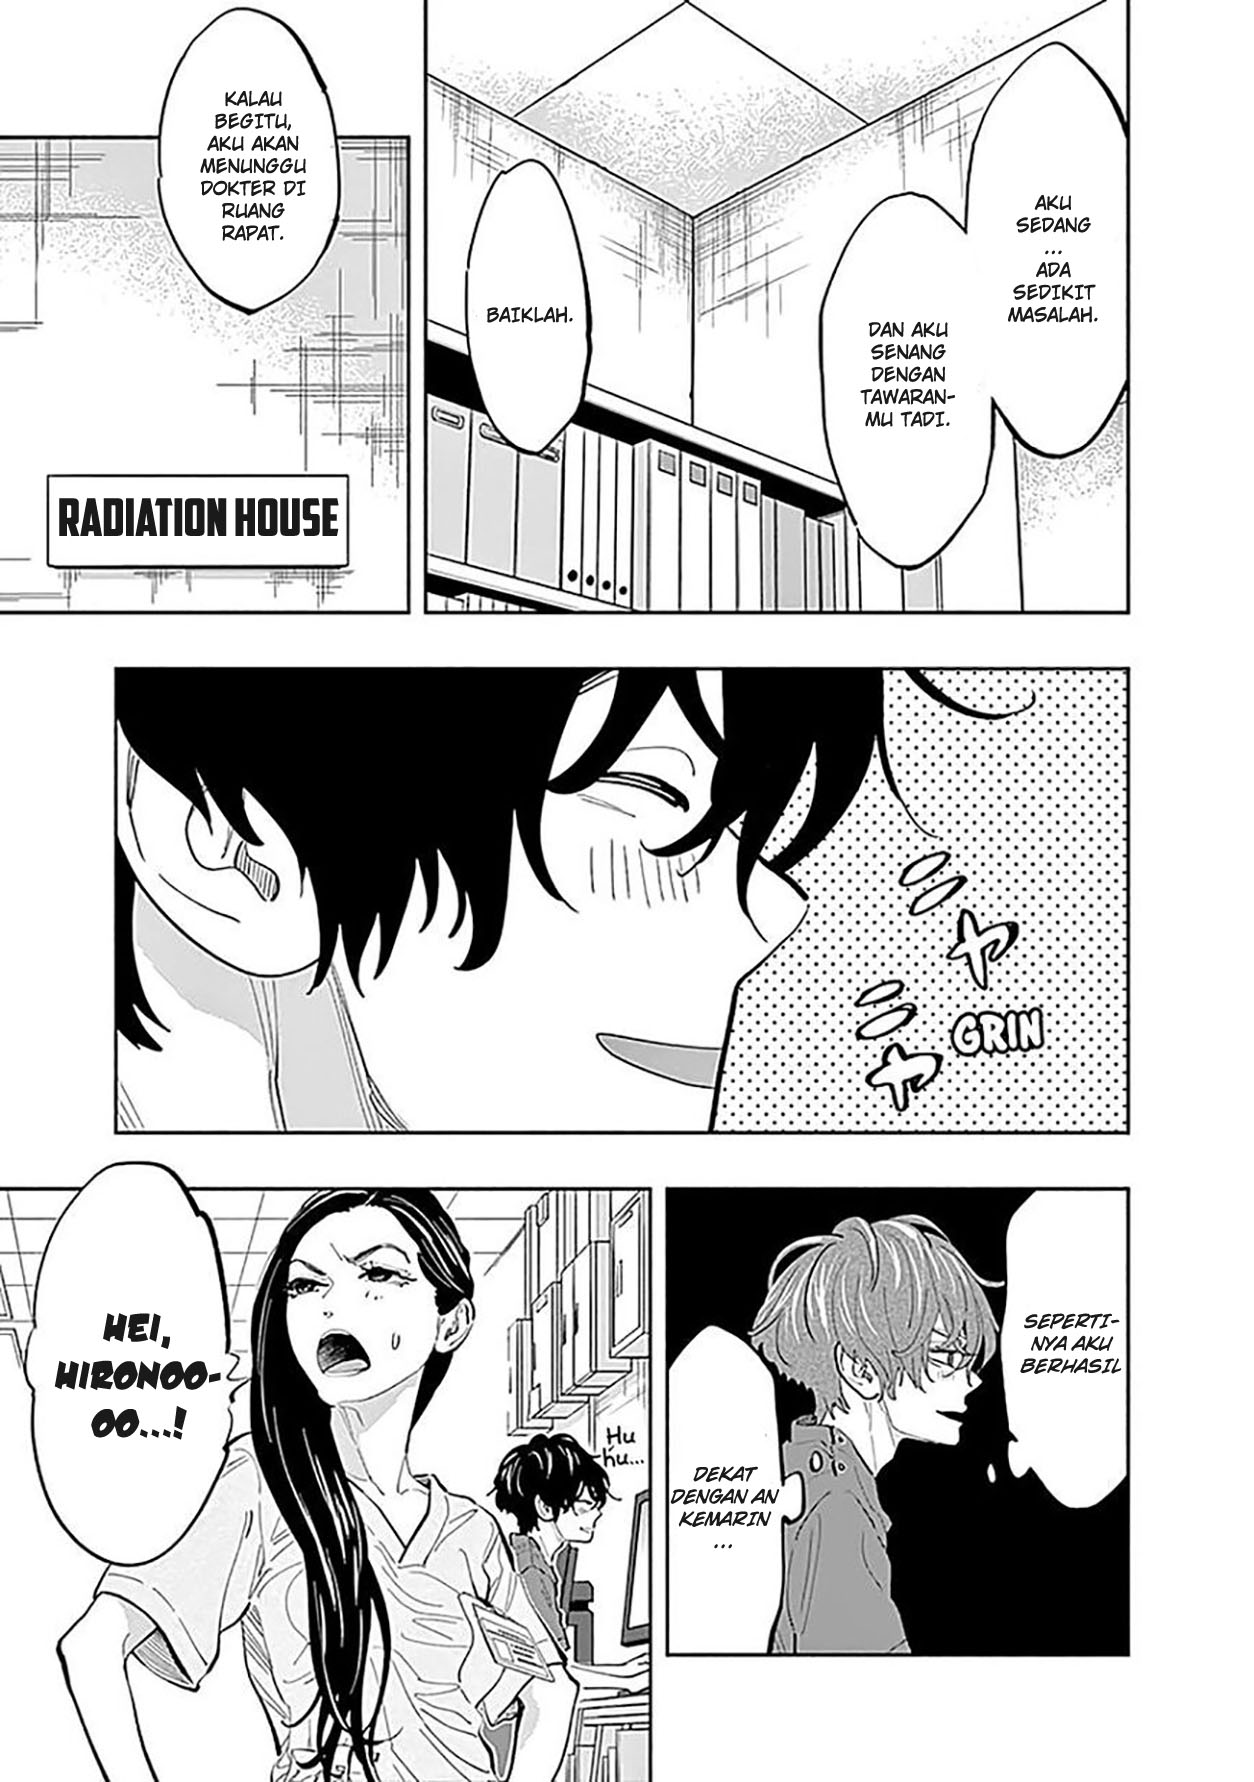 Radiation House Chapter 22 7